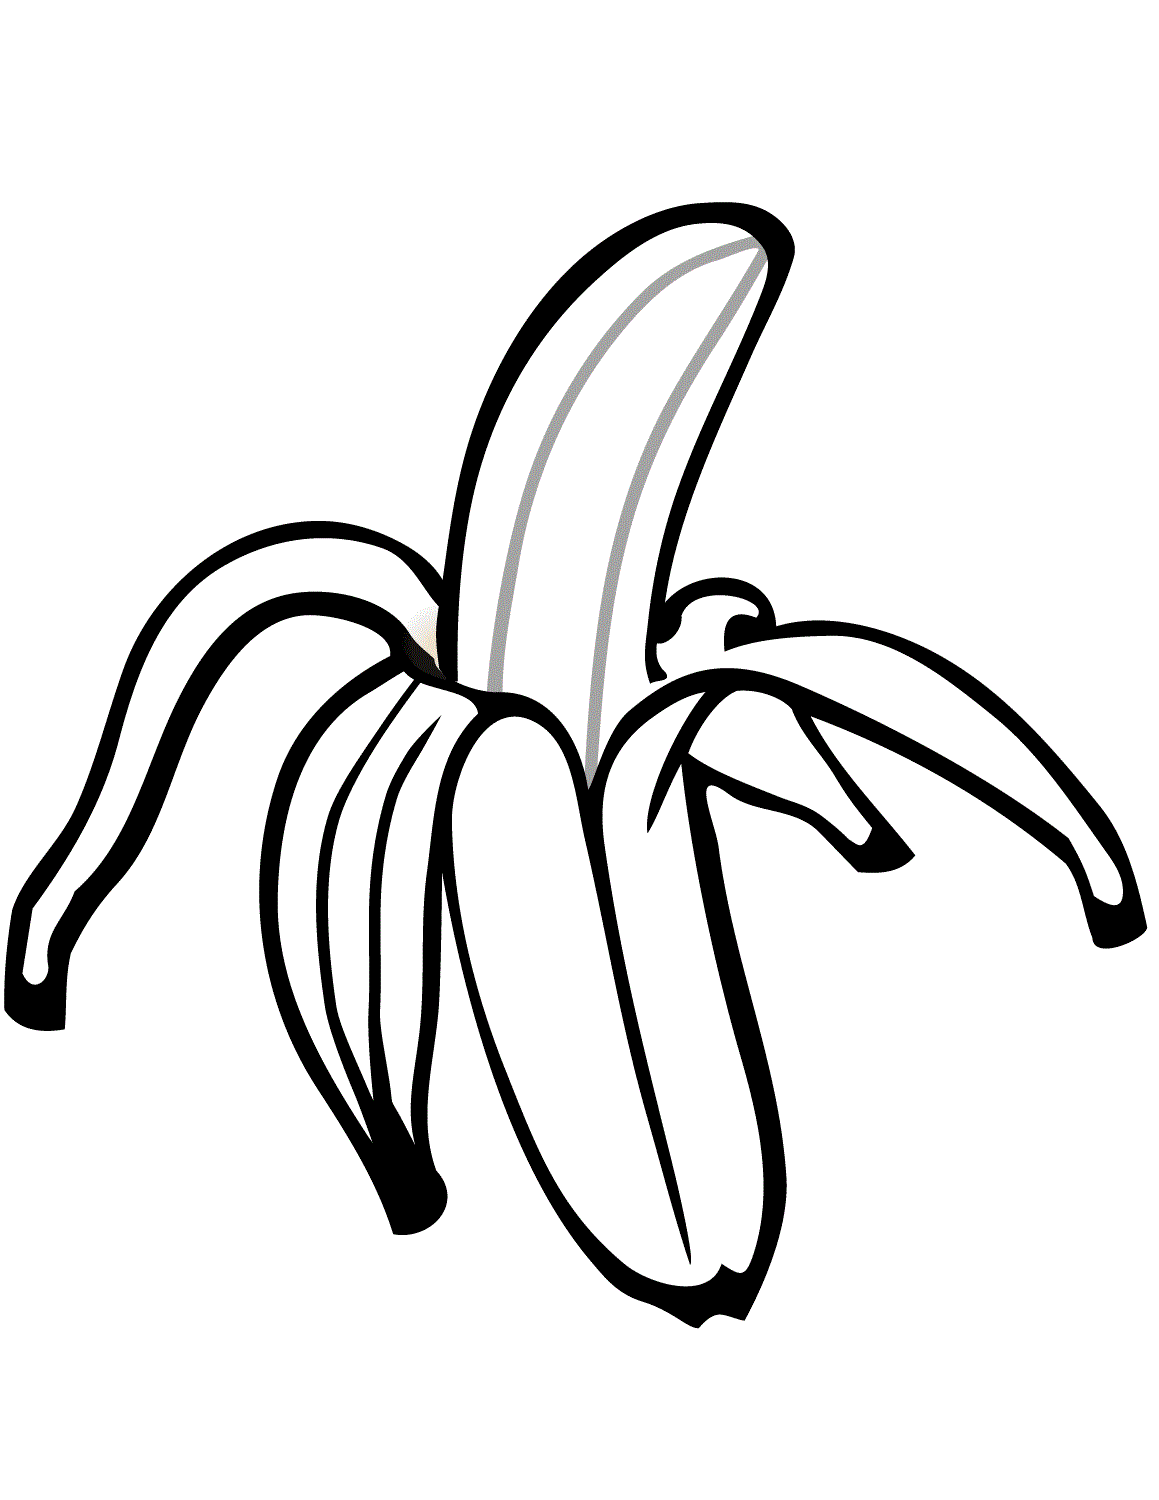 Ready To Eat Banana Coloring Page